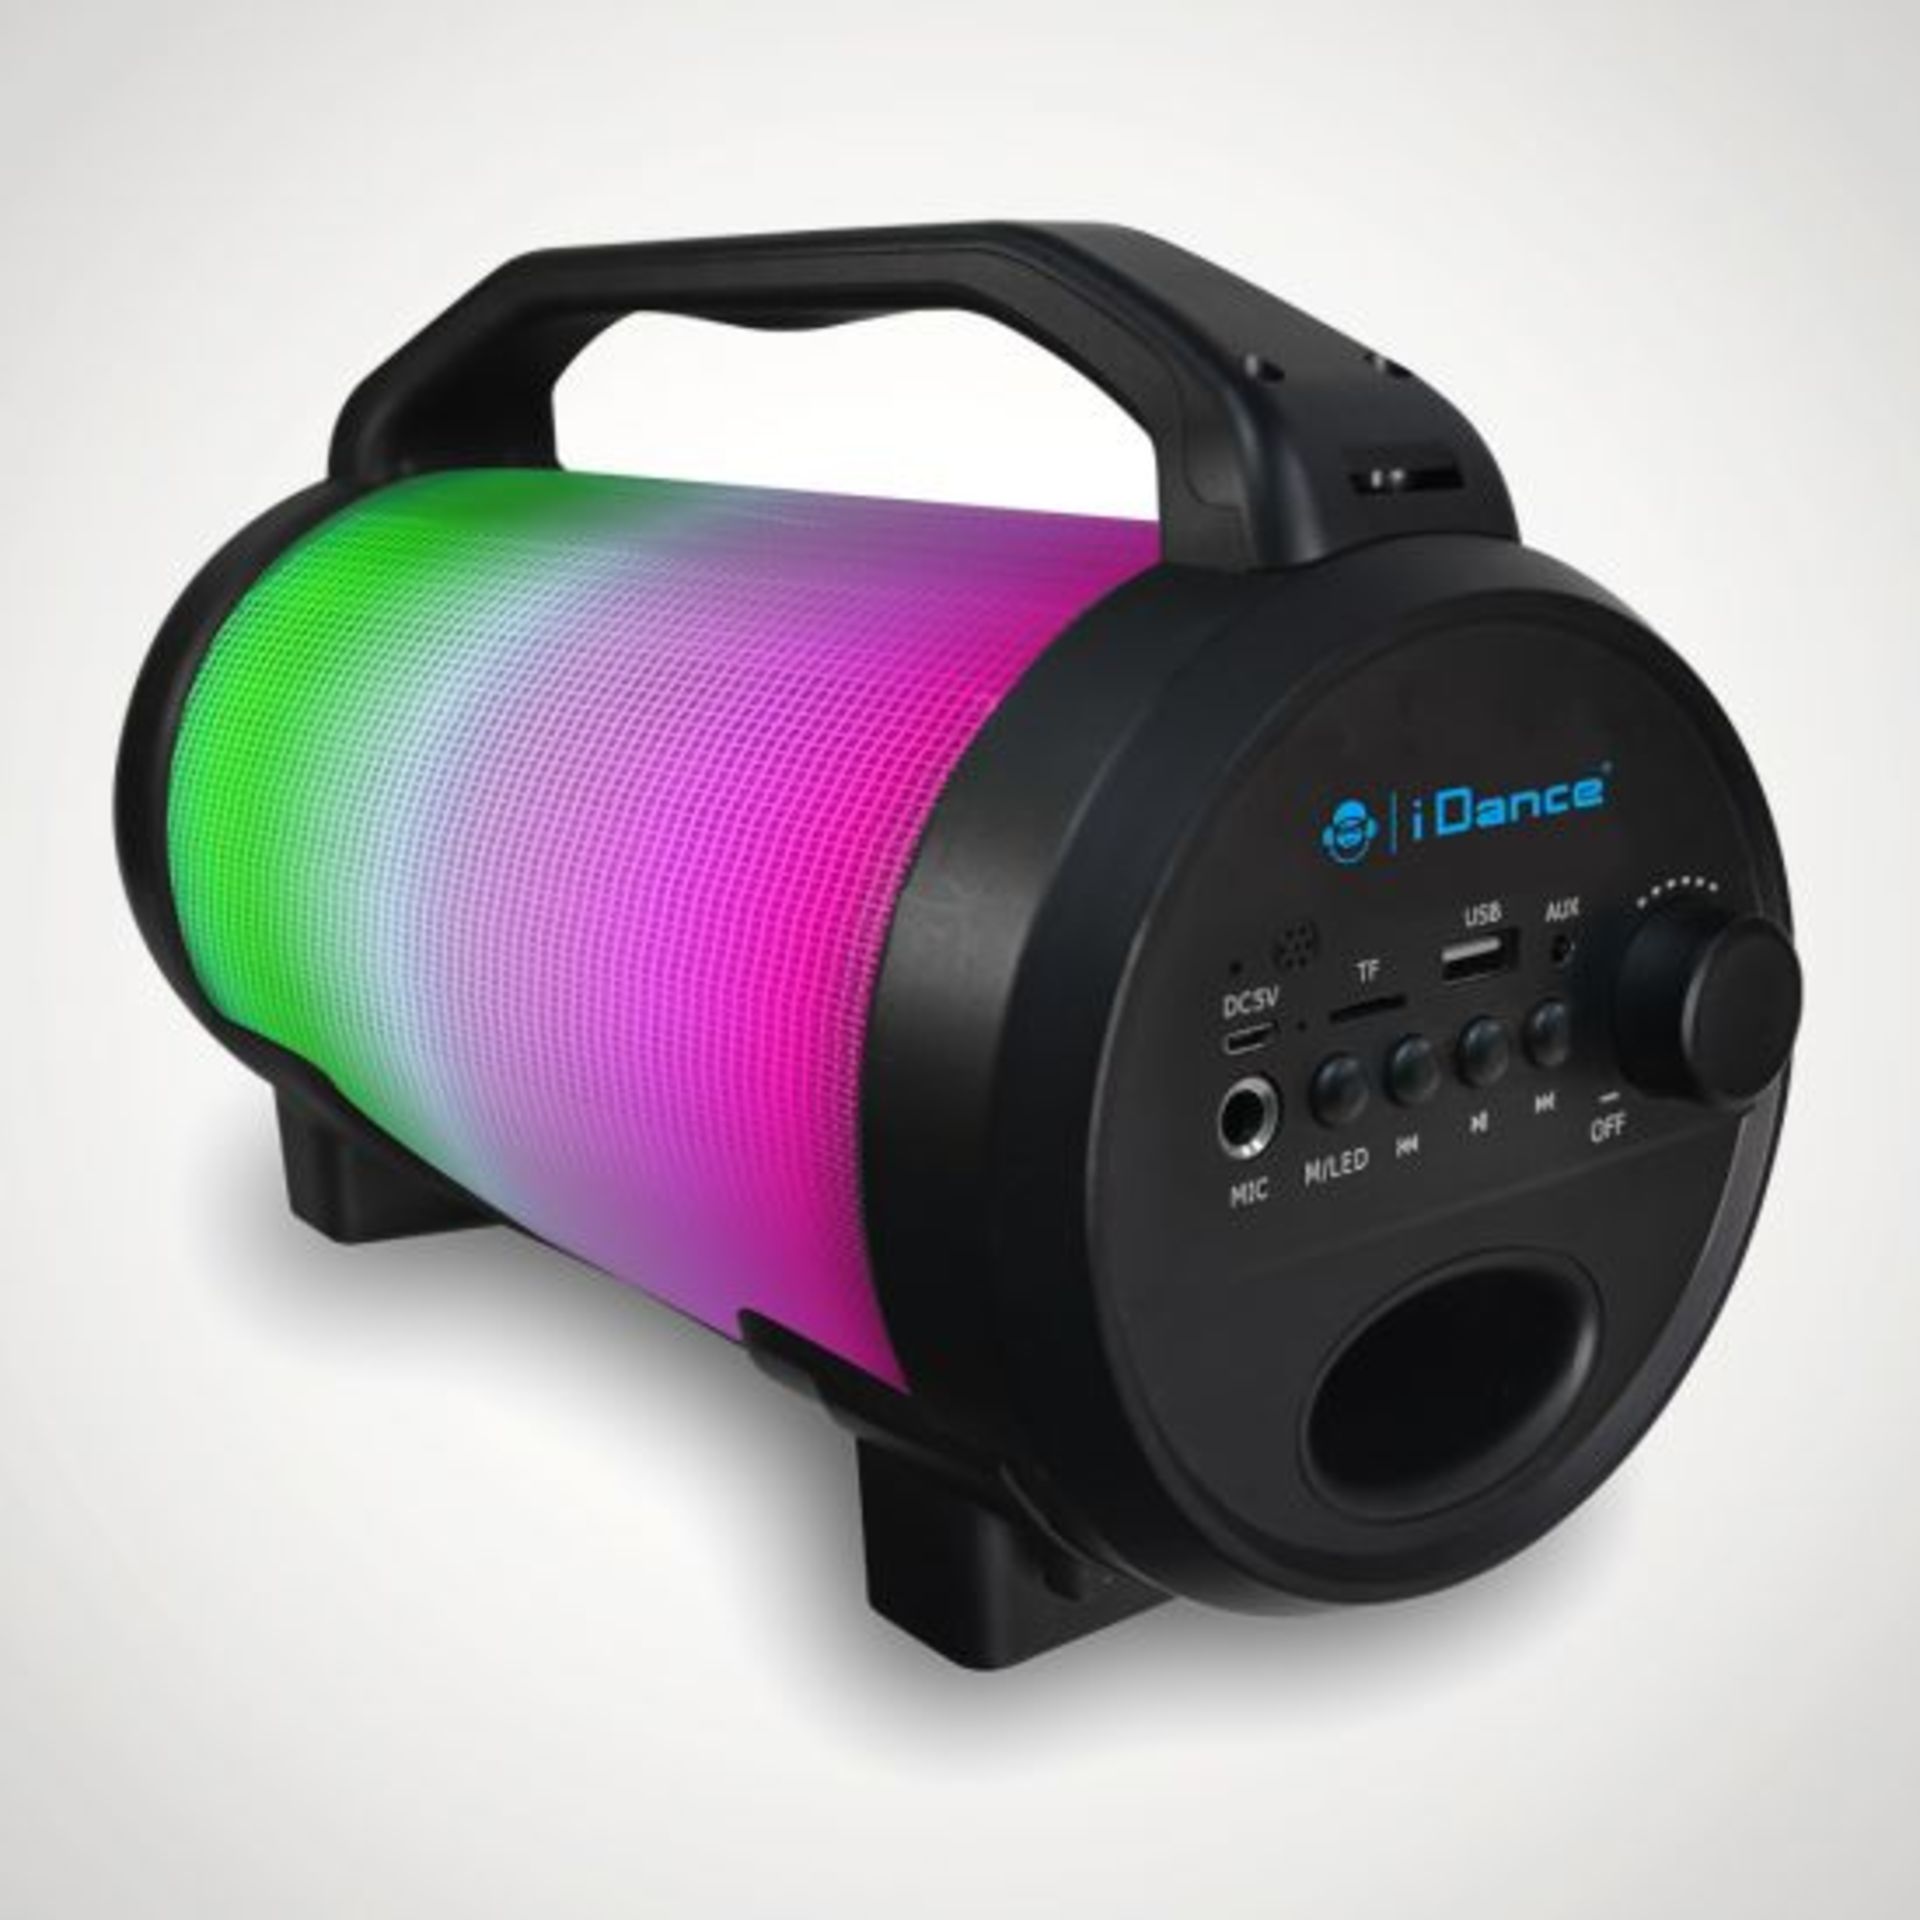 (R8) Lot RRP £90. 3x iDance Cyclone 400 Bluetooth Party Speaker With Disco Light RRP £30 Each. (Uni